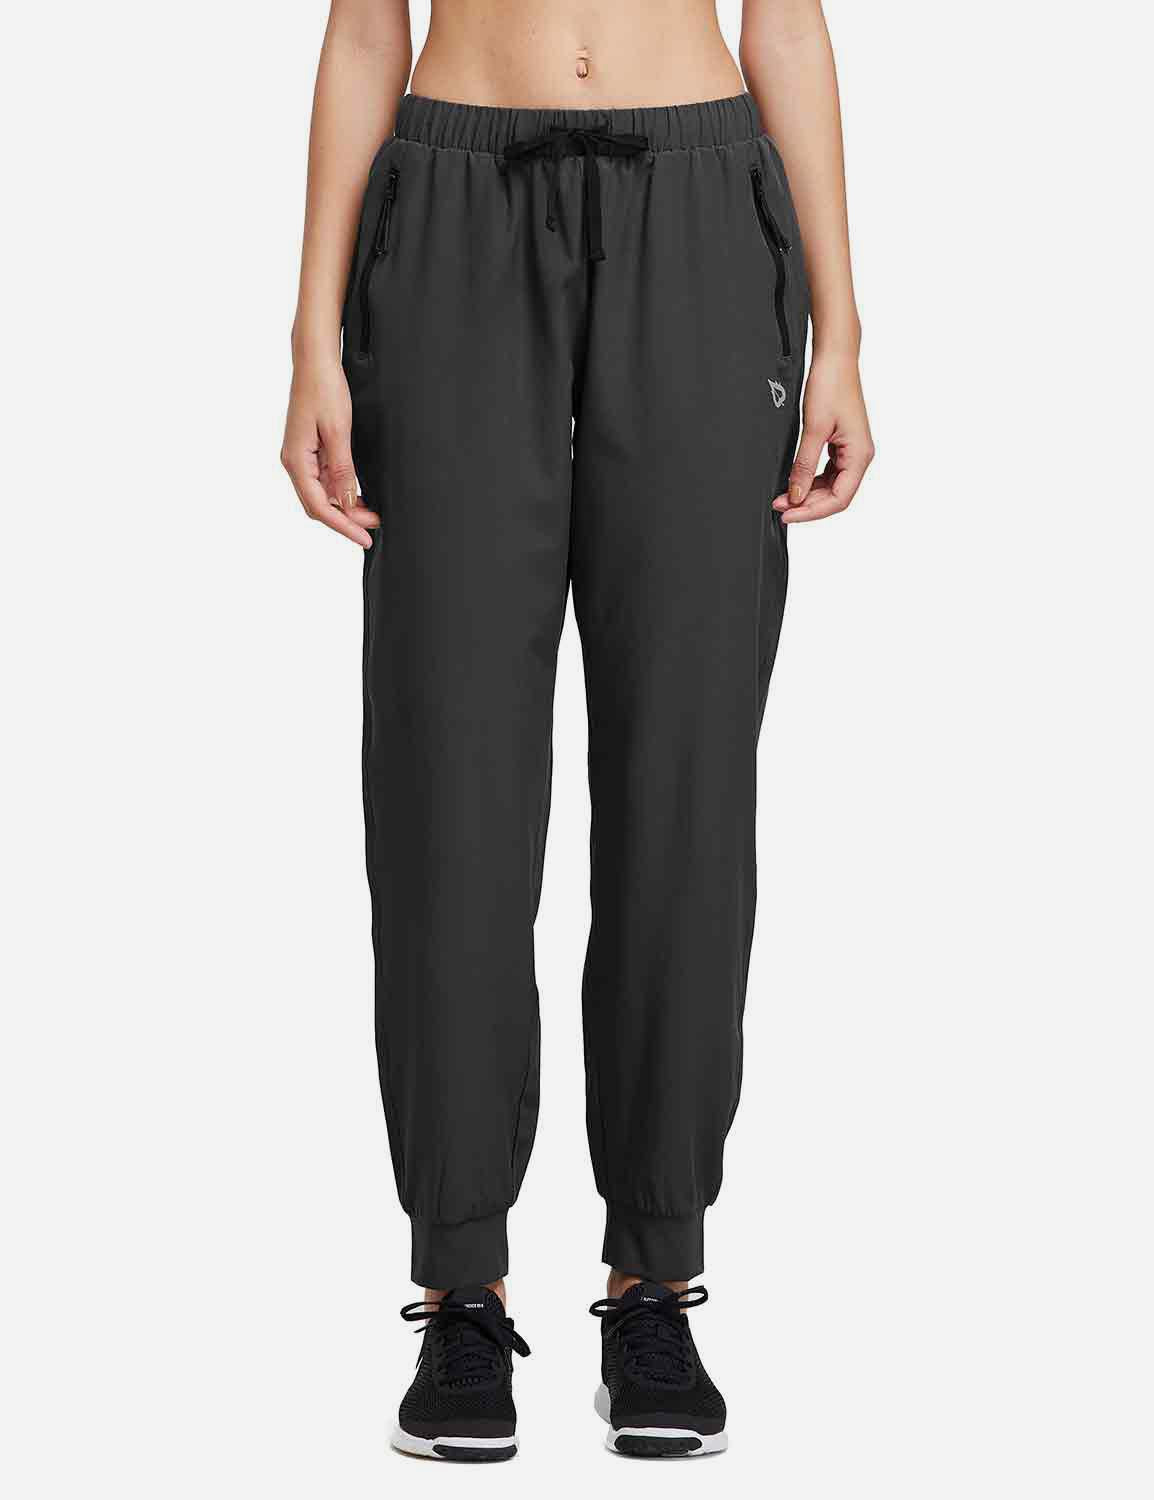 BALEAF Women's UPF50+ Mid Rise Tapered & Pocketed Weekend Sweatpants